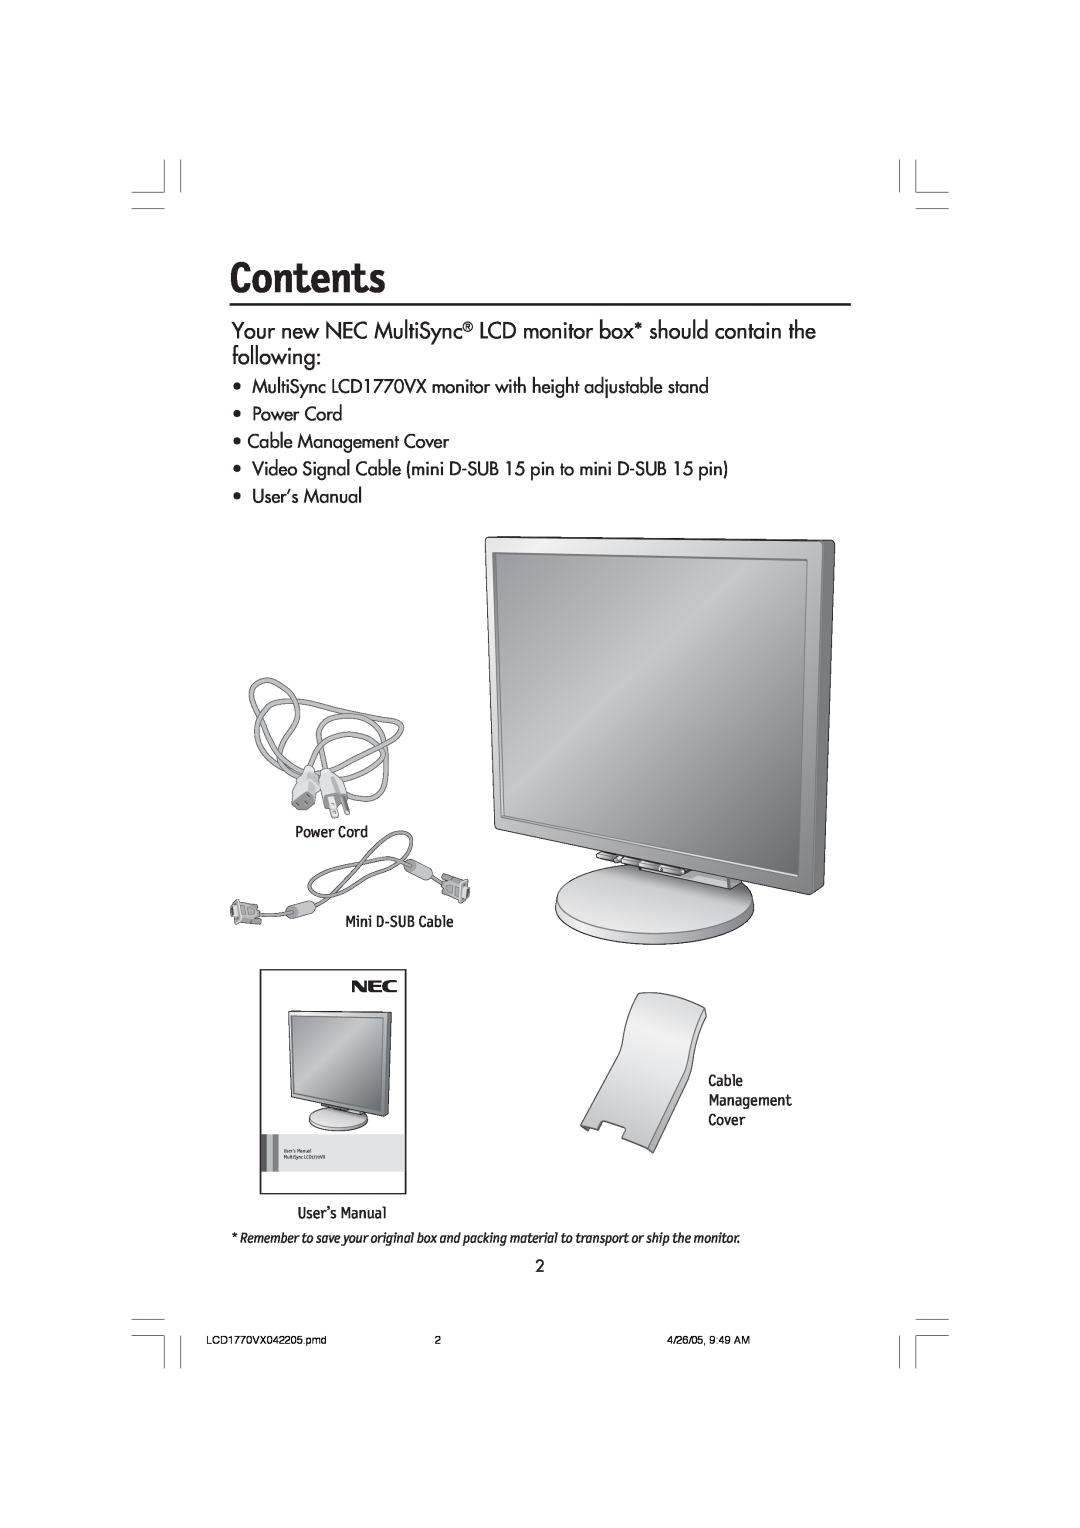 NEC LCD1770VX user manual Contents, Your new NEC MultiSync LCD monitor box* should contain the following, User’s Manual 